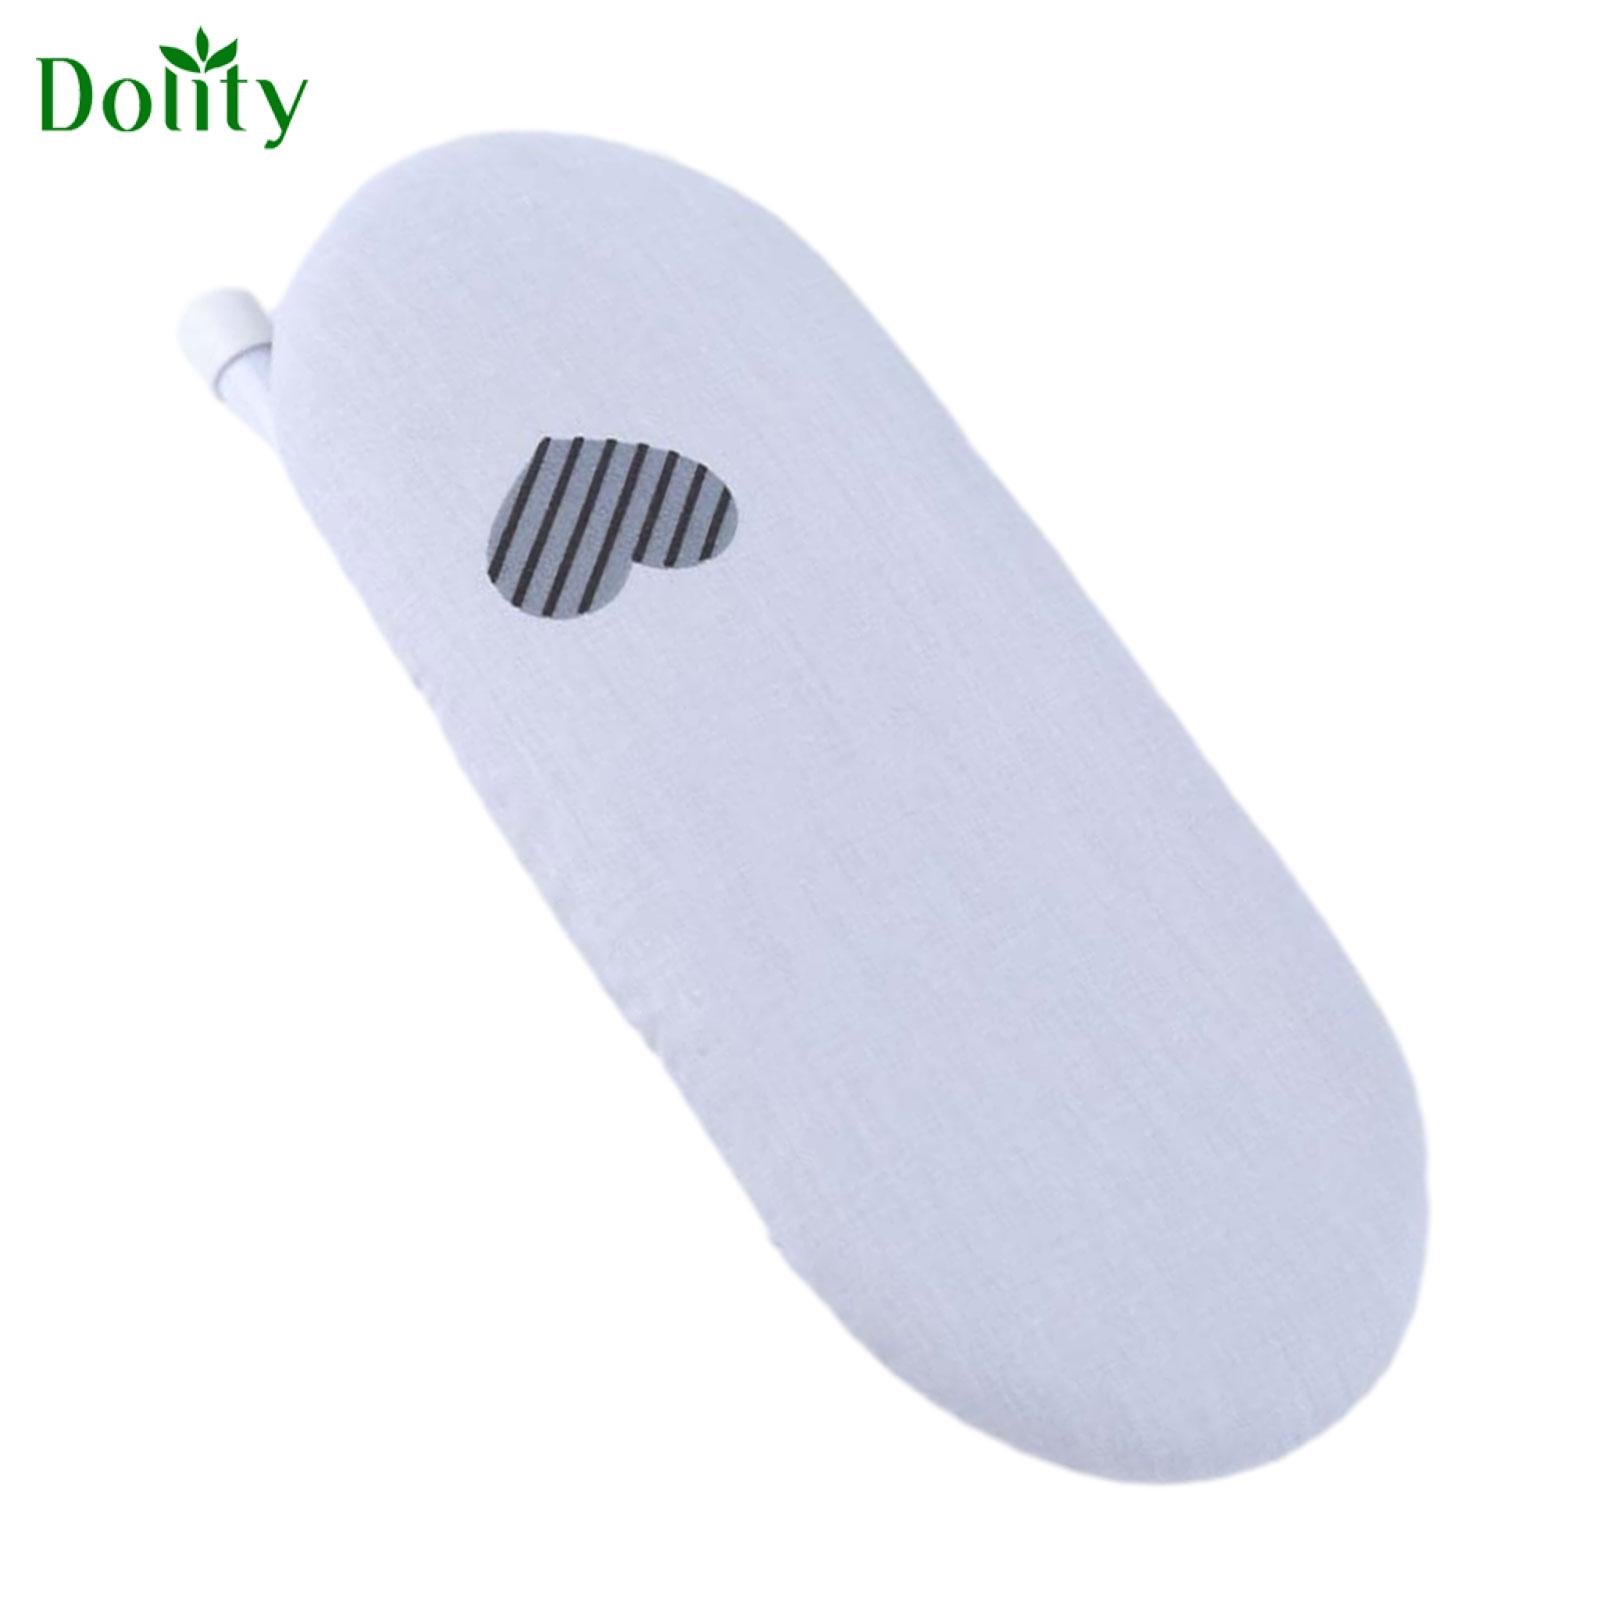 Dolity Small Ironing Board Countertop Iron Board for Sewing Room Laundry